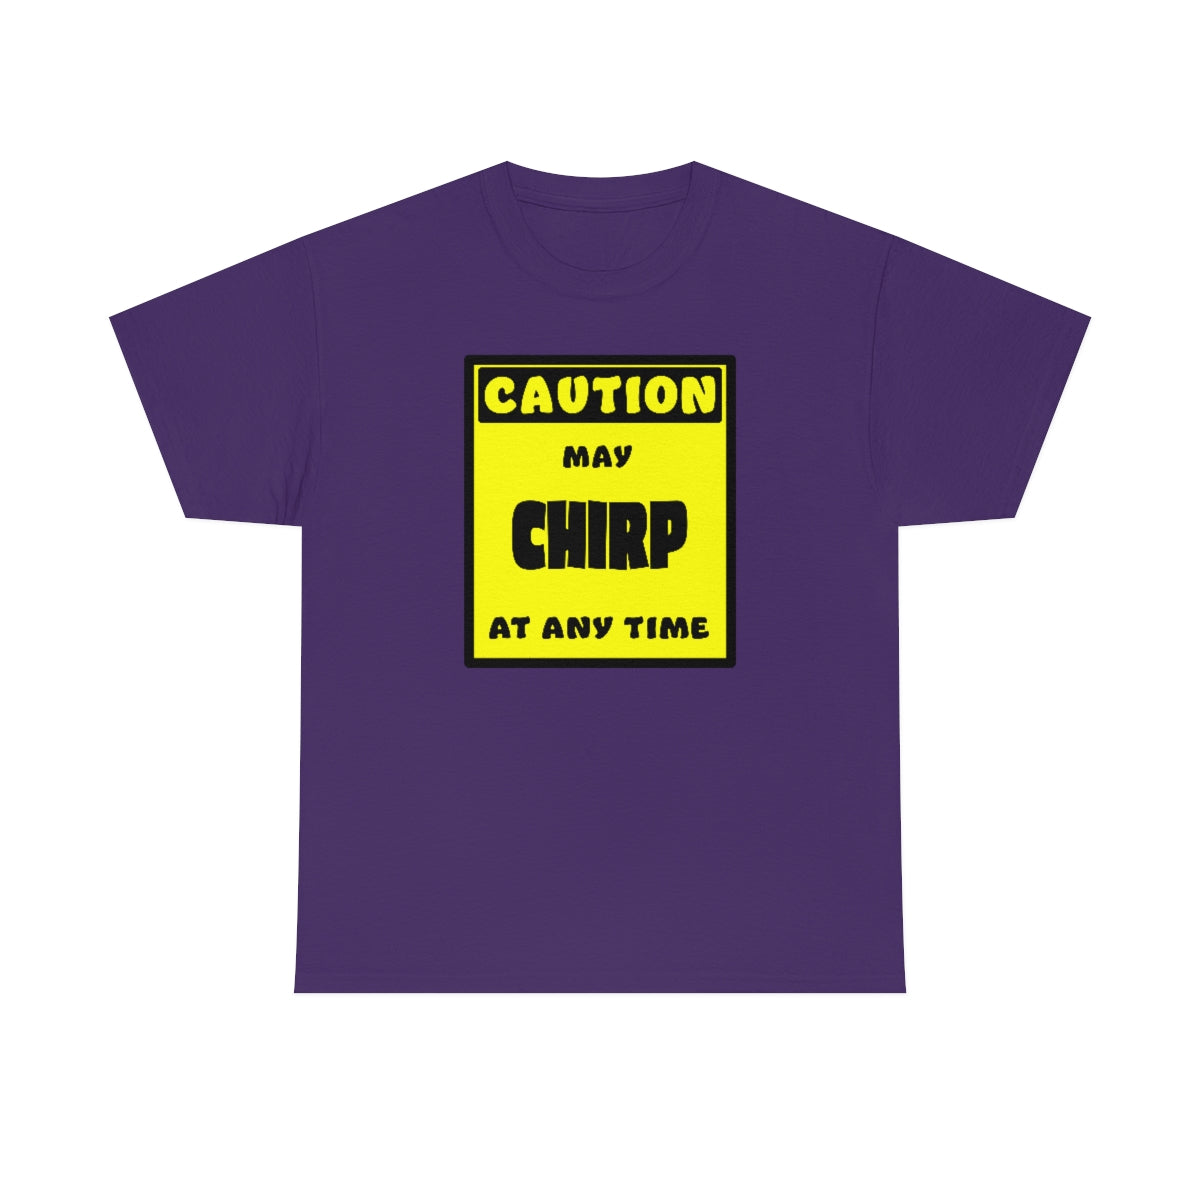 CAUTION! May CHIRP at any time! - T-Shirt T-Shirt AFLT-Whootorca Purple S 